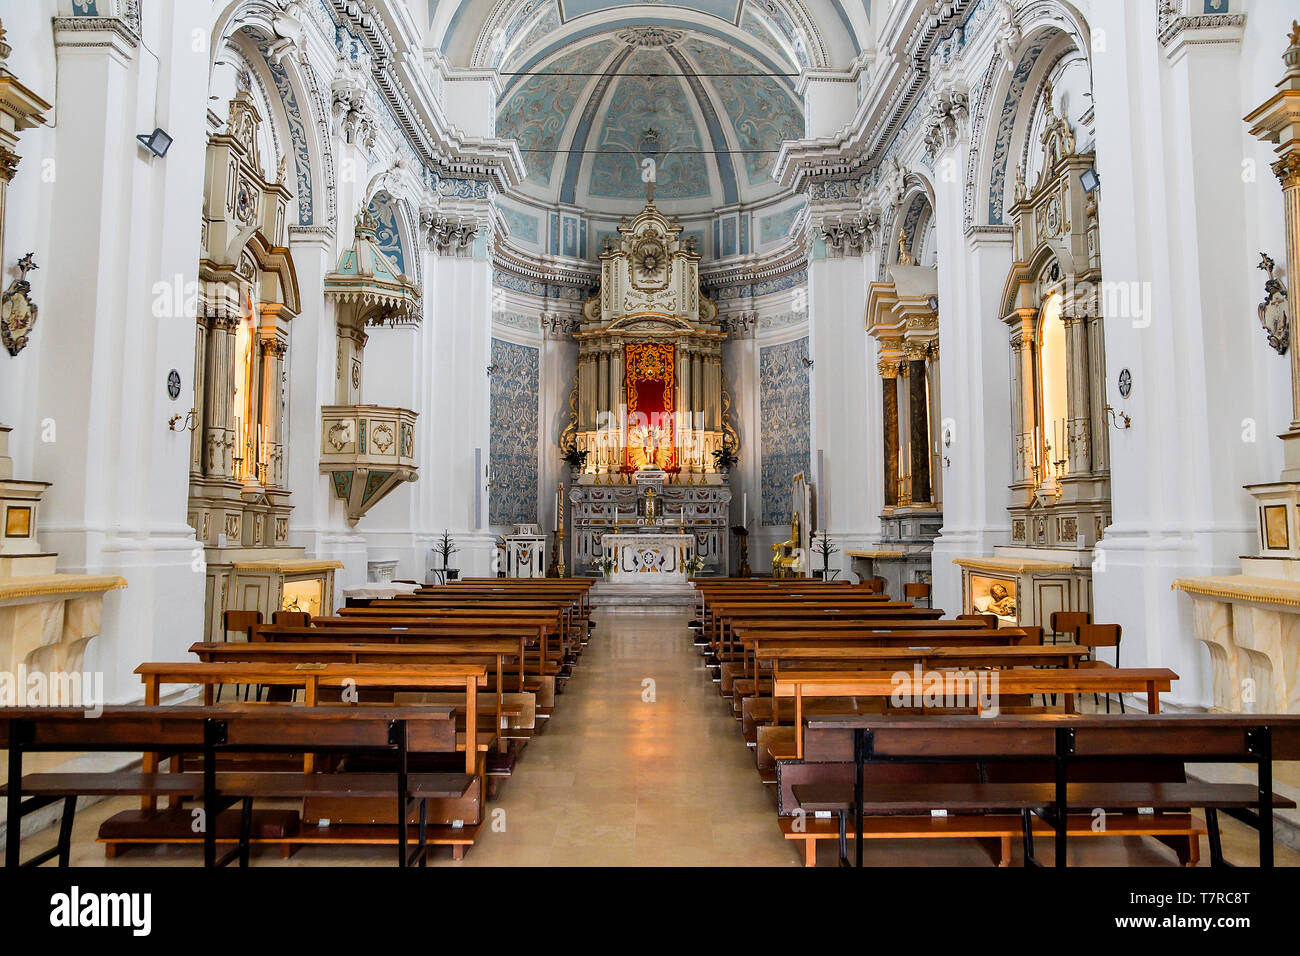 Interior of Chiesa del Carmine in Floridia, Province of Syracuse, Italy. Stock Photo